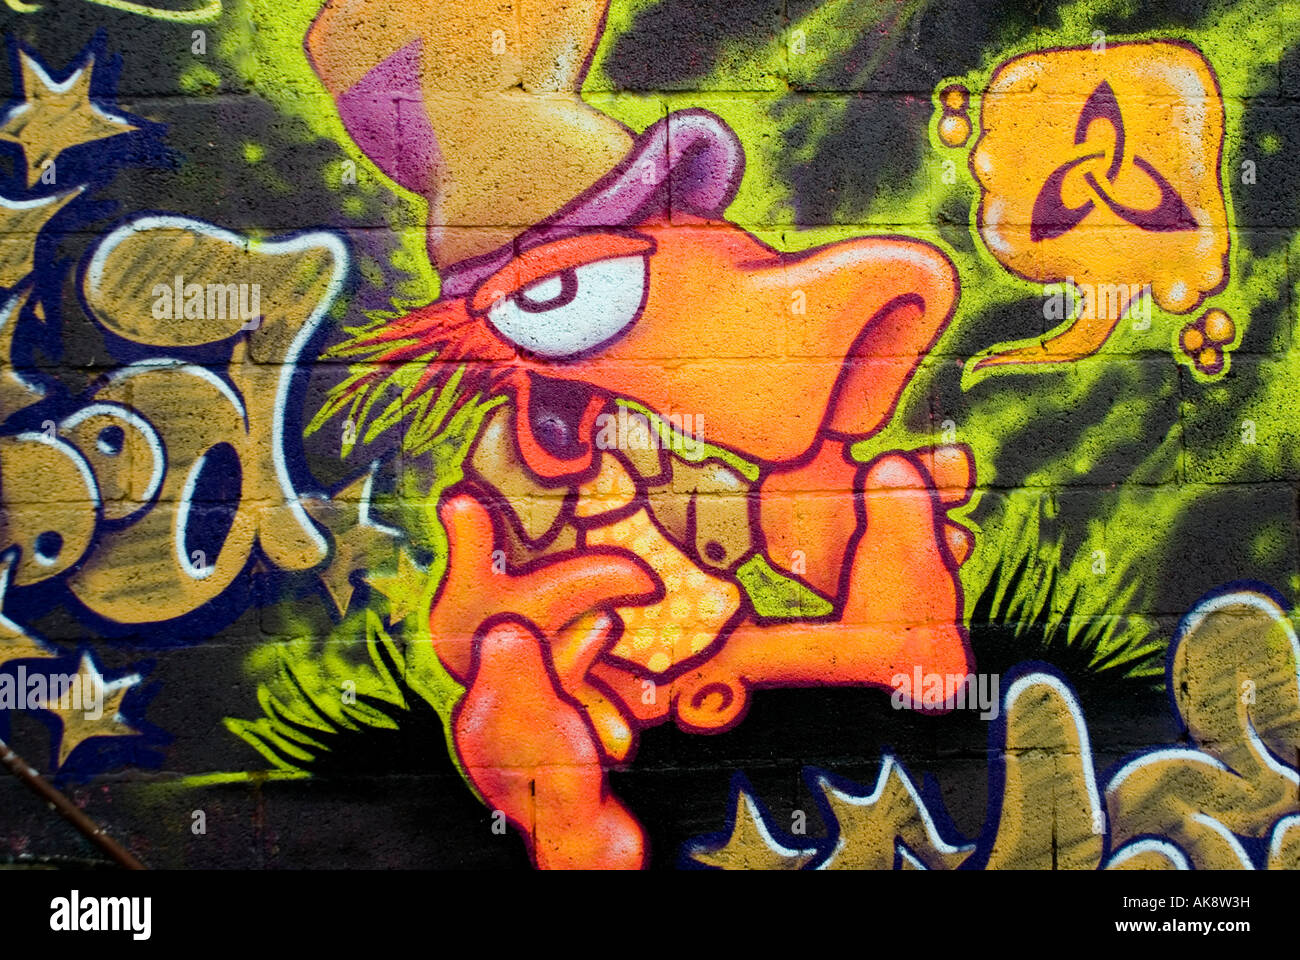 Cheerful Happy Smiling Colourful Orange Graffiti Mad Hatter Figure 272A Leopold Street Cowley Road Oxford England UK 2006 NR Stock Photo